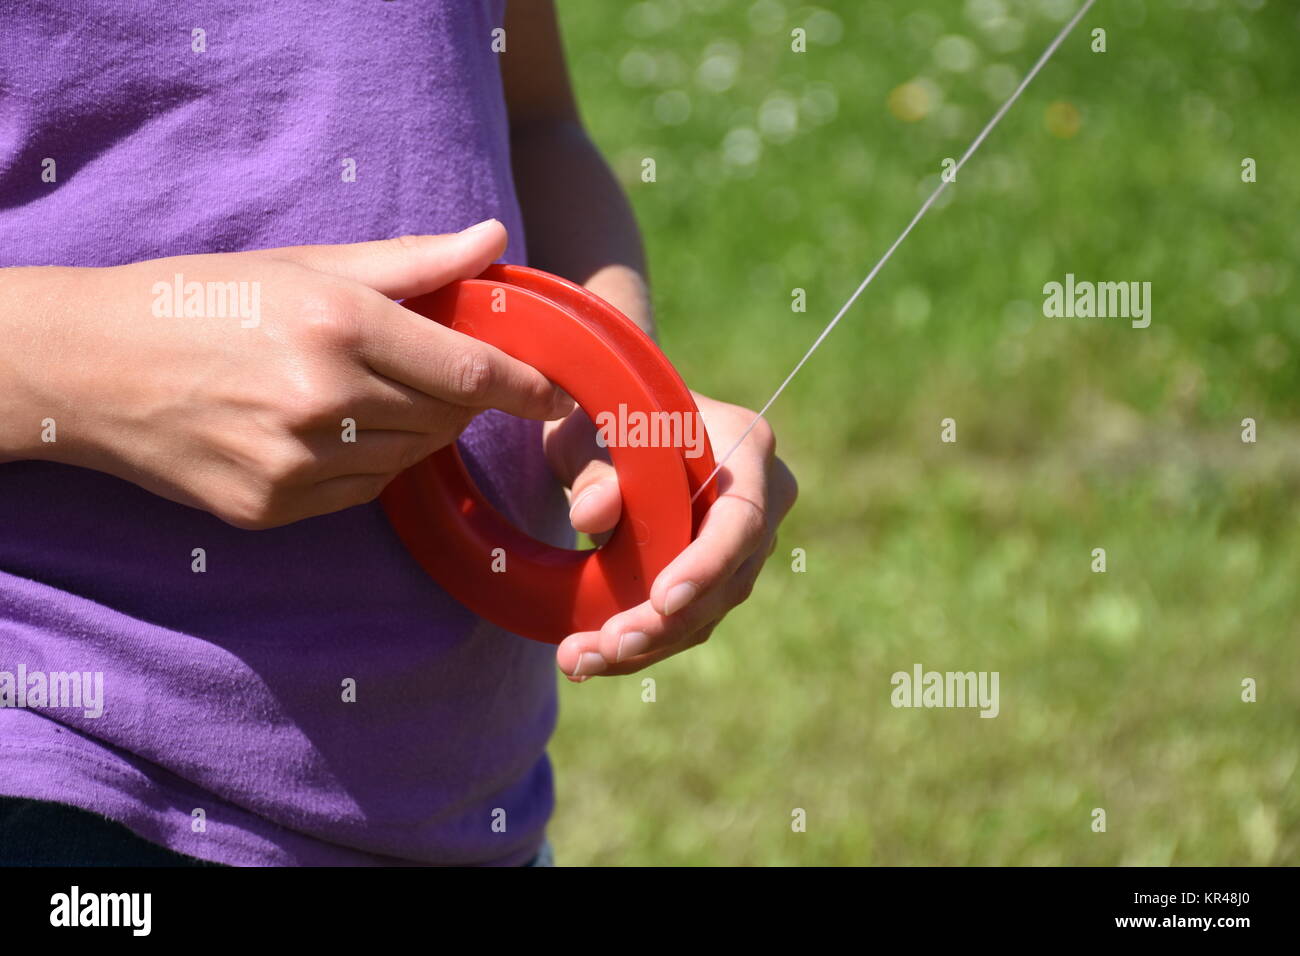 holding kite string,steer,roll,string,rope,leash,dragon,hold Stock Photo